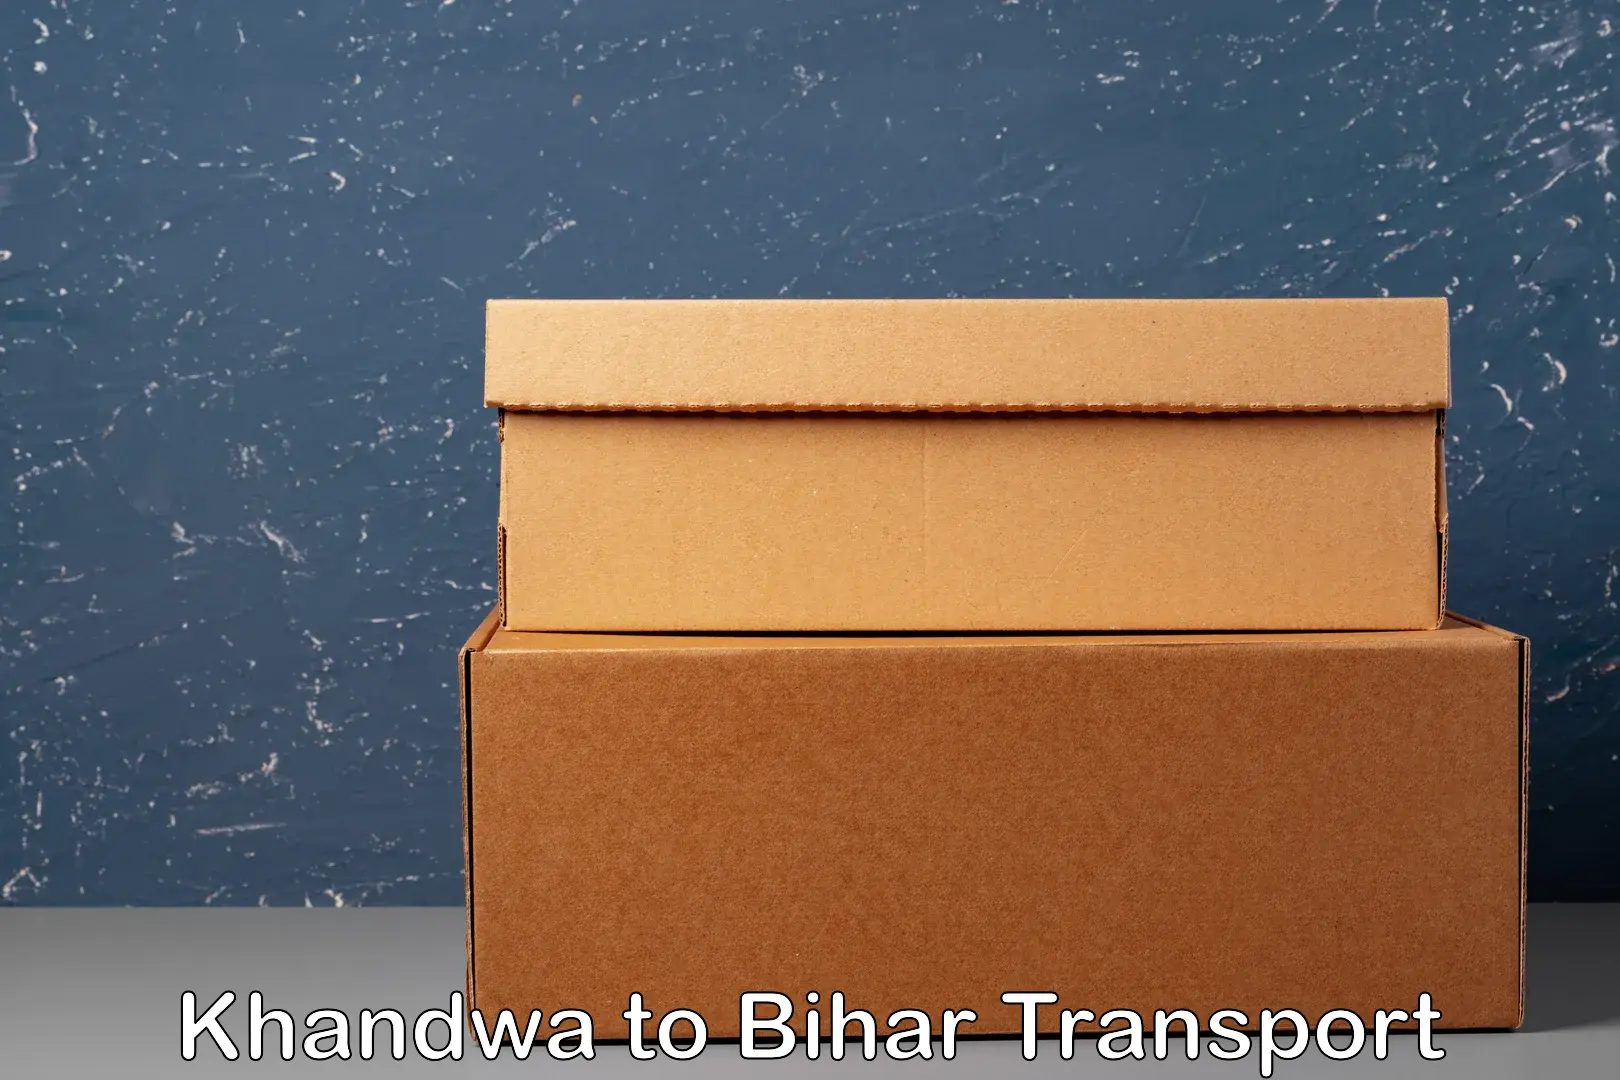 Container transport service Khandwa to Bihar